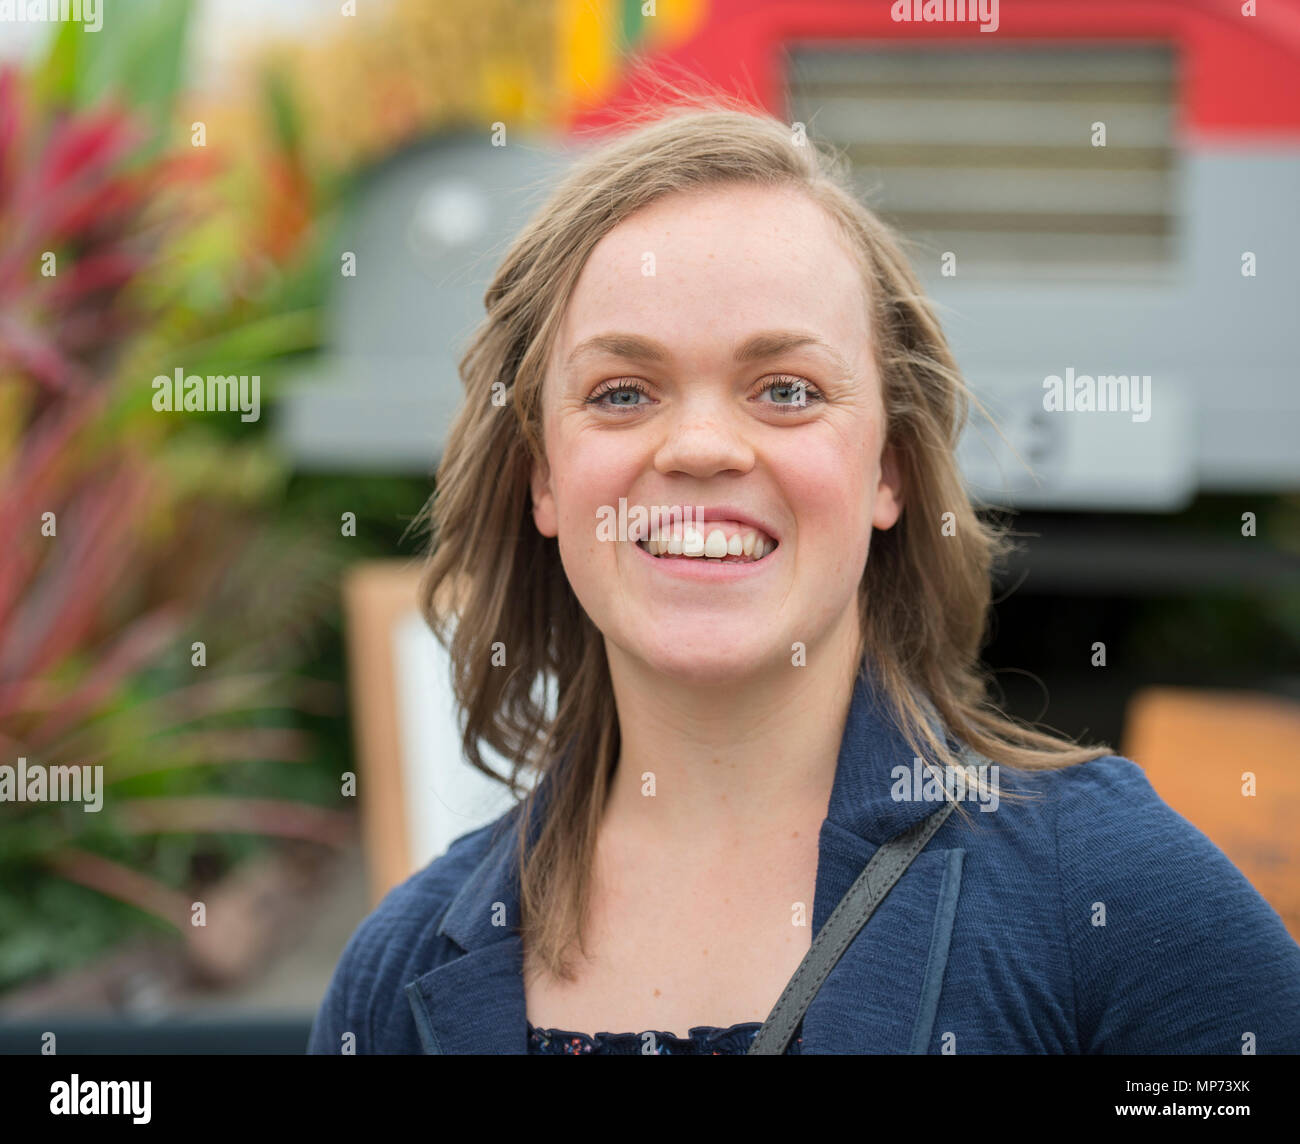 Royal Hospital Chelsea, London, UK. 21 May, 2018. Press day for the RHS Chelsea Flower Show 2018. Photo: British Paralympian swimmer Ellie Simmonds OBE at the Flower Show. Credit: Malcolm Park/Alamy Live News. Stock Photo